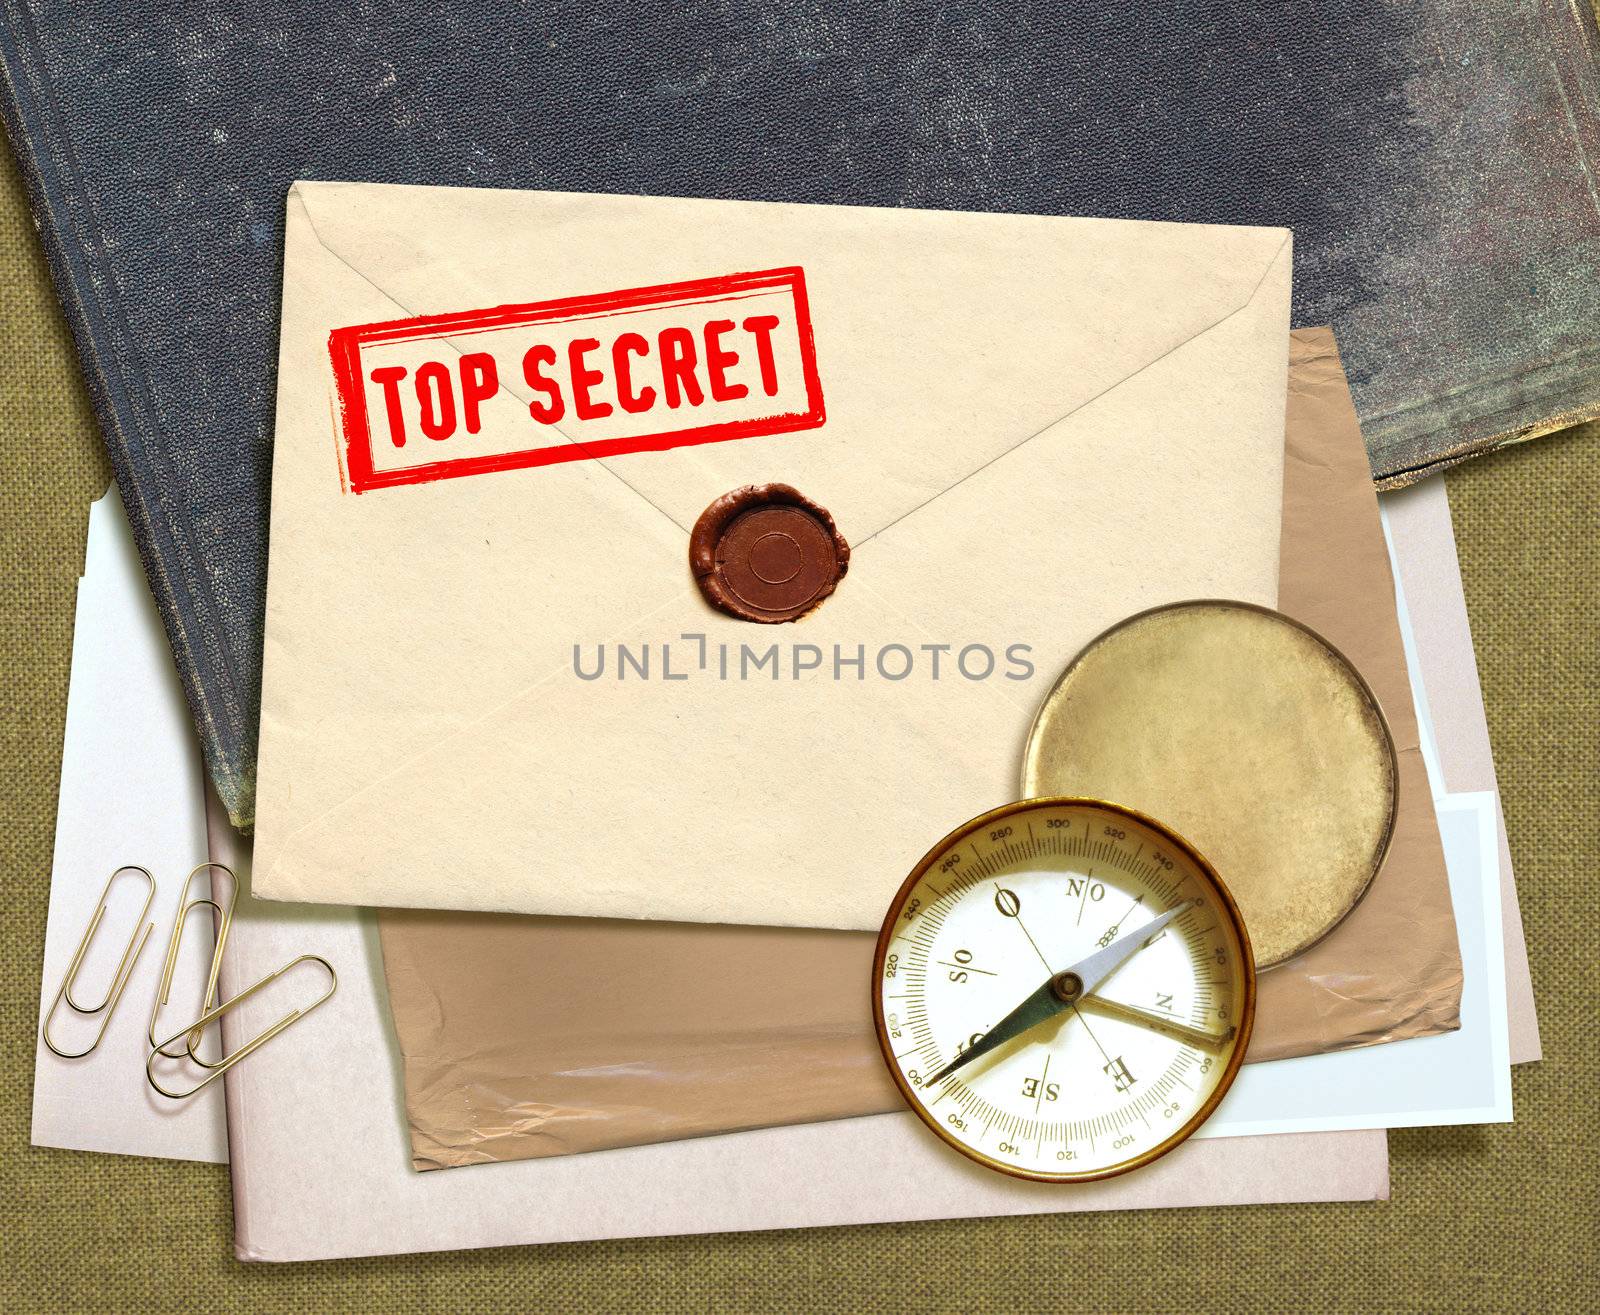 dorsal view of military top secret documents with stamp